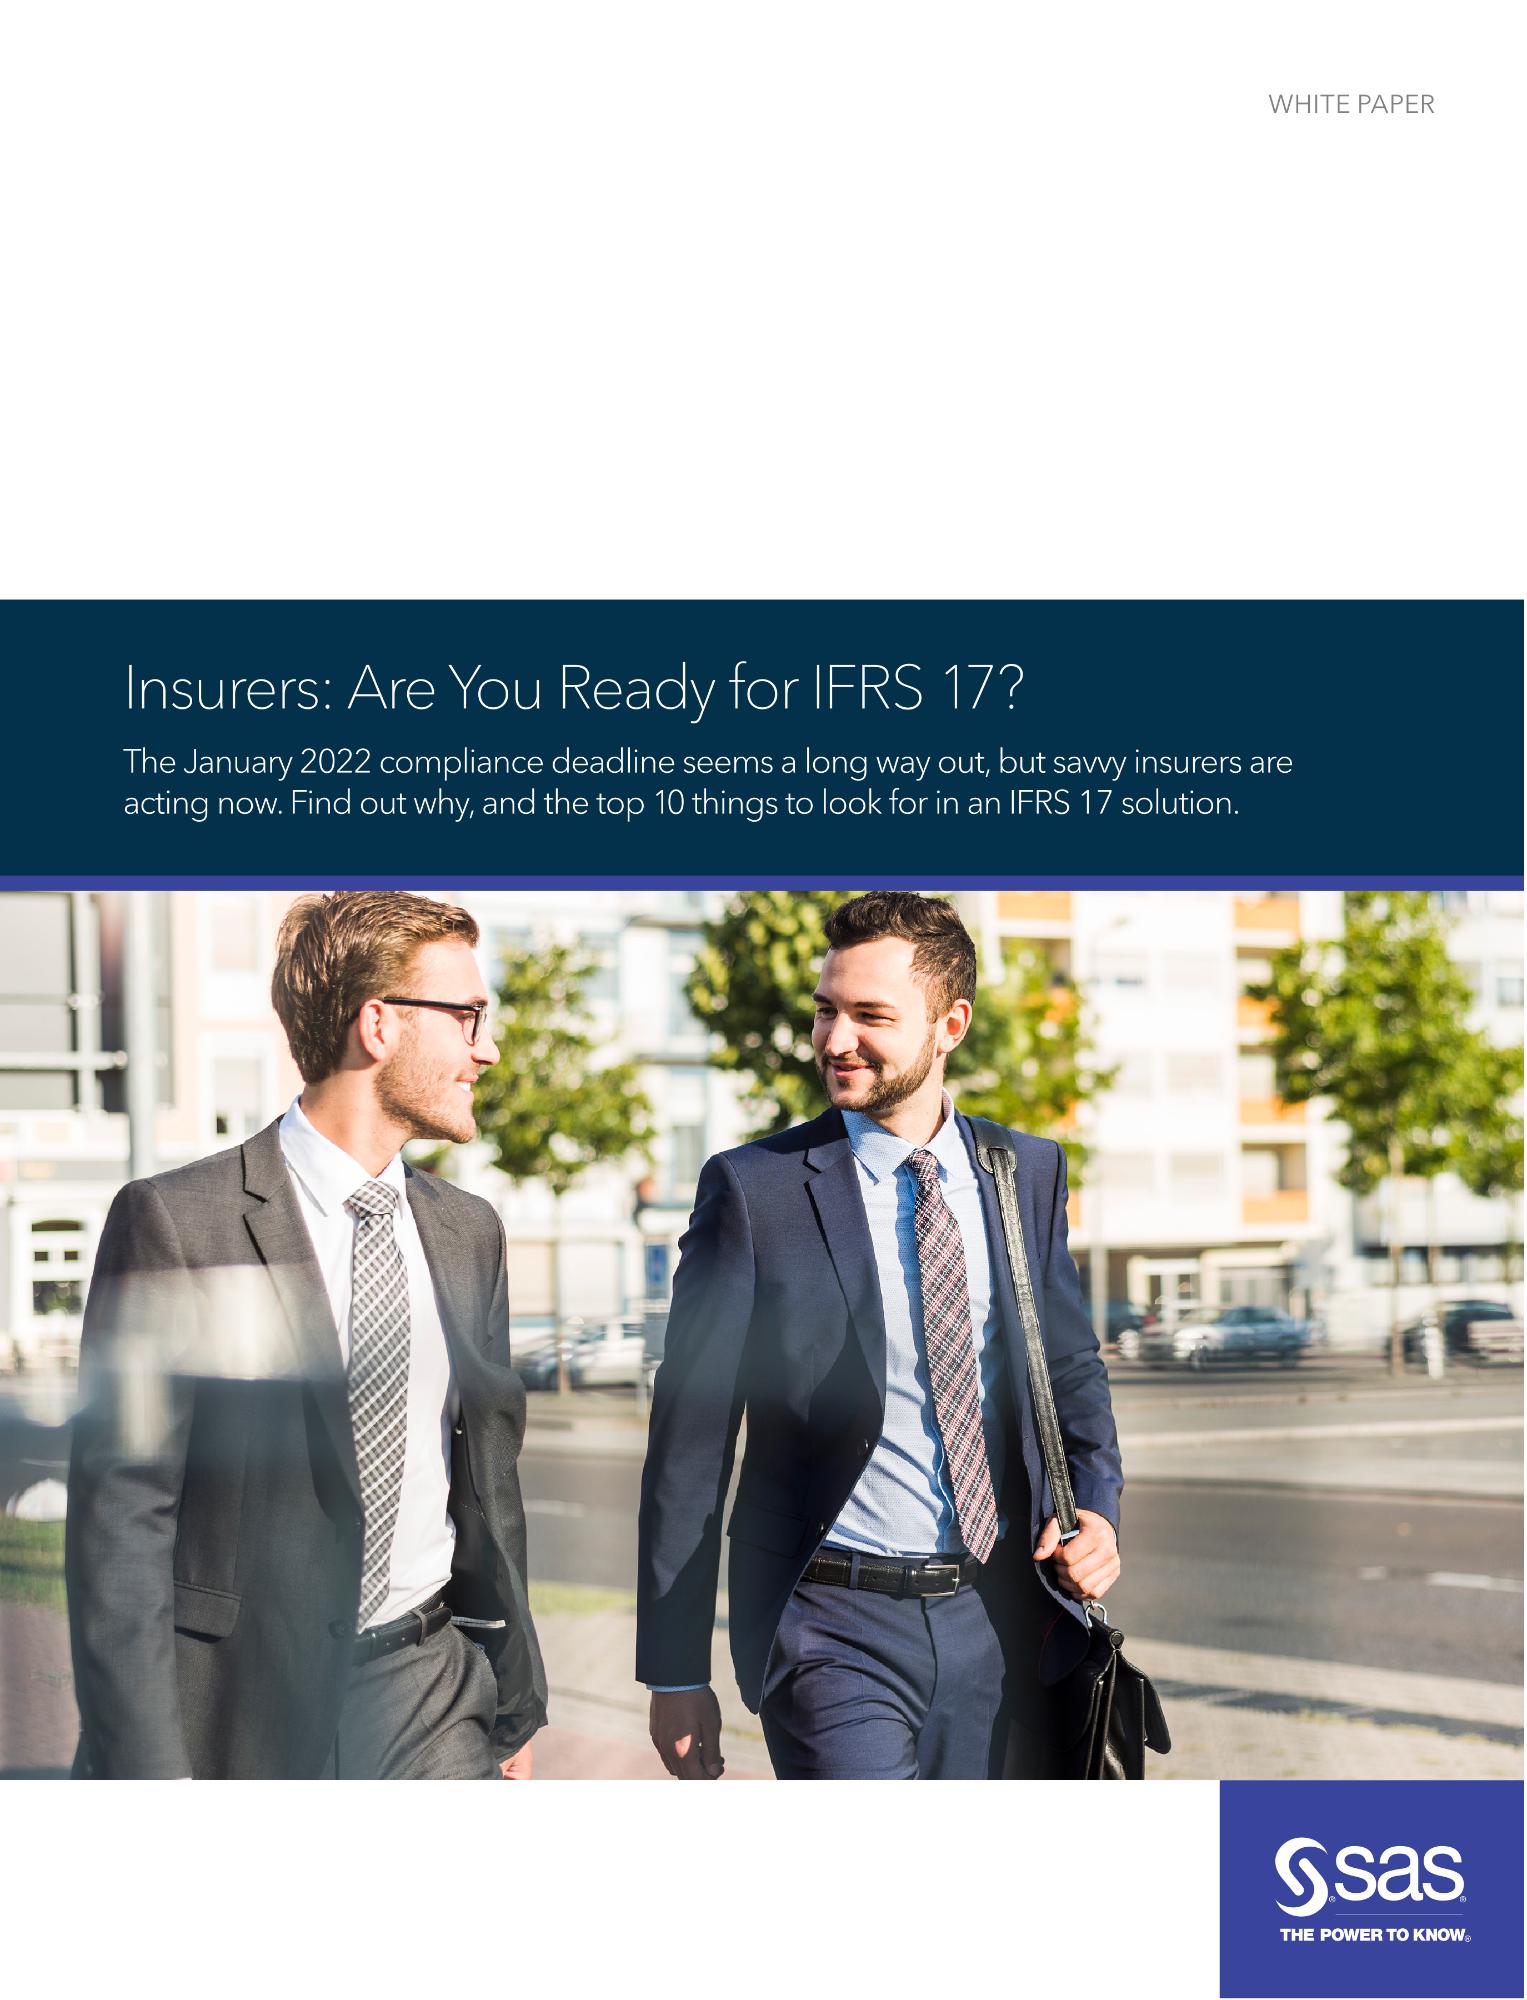 Insurers: Are You Ready for IFRS 17?